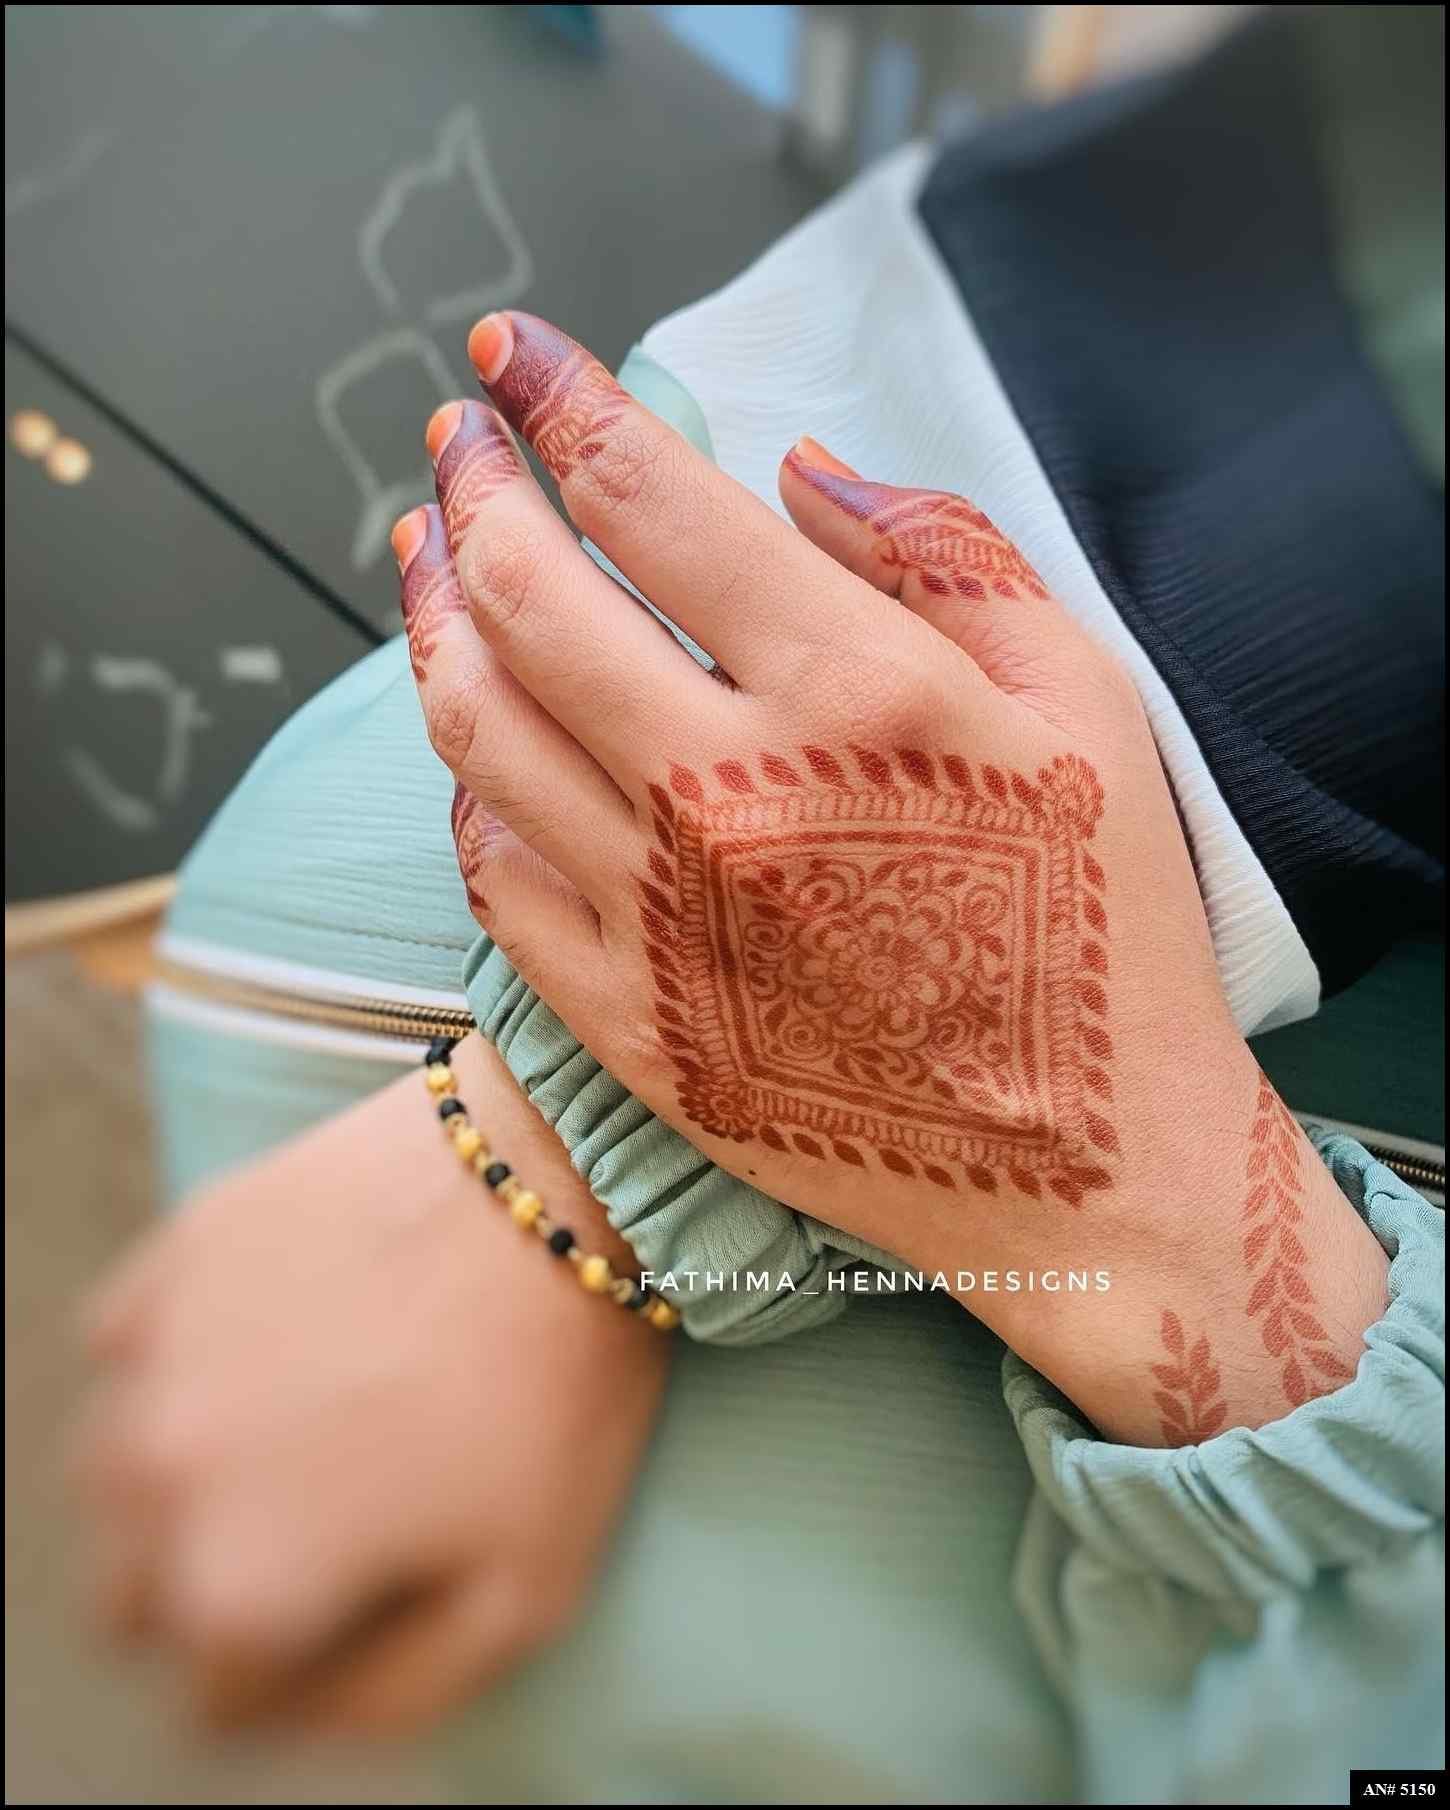 Sikh Bride, Henna Hand and Engagement Ring, Bracelet Bangles and Colorful  Lengha, Ceremony